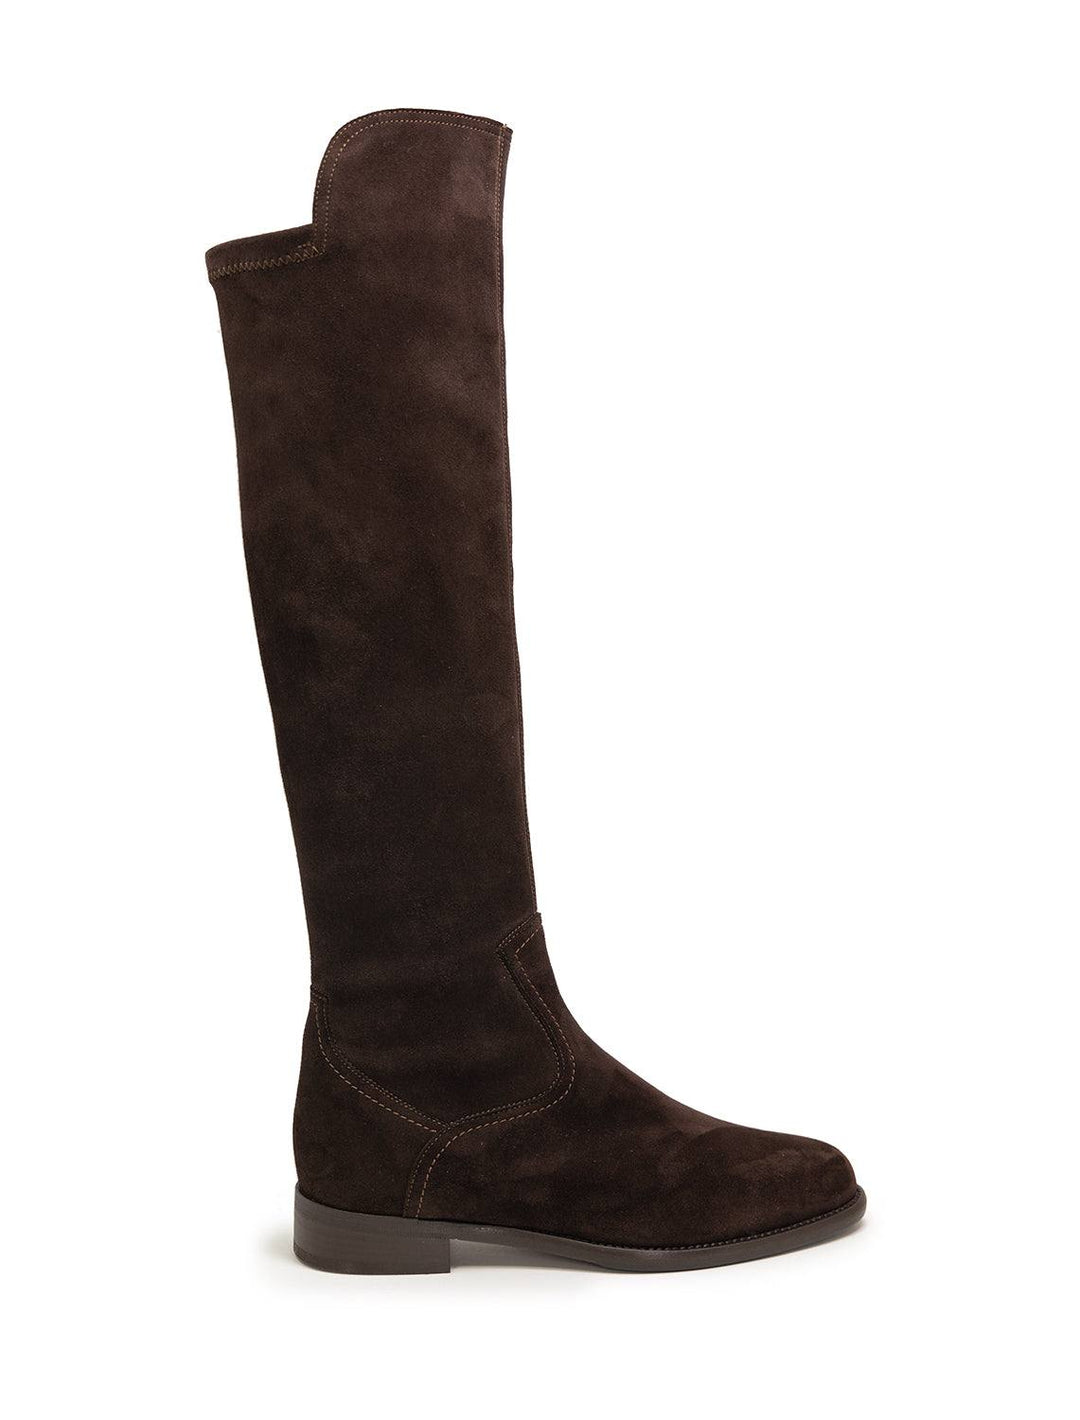 pull on boot in chocolate suede (2)